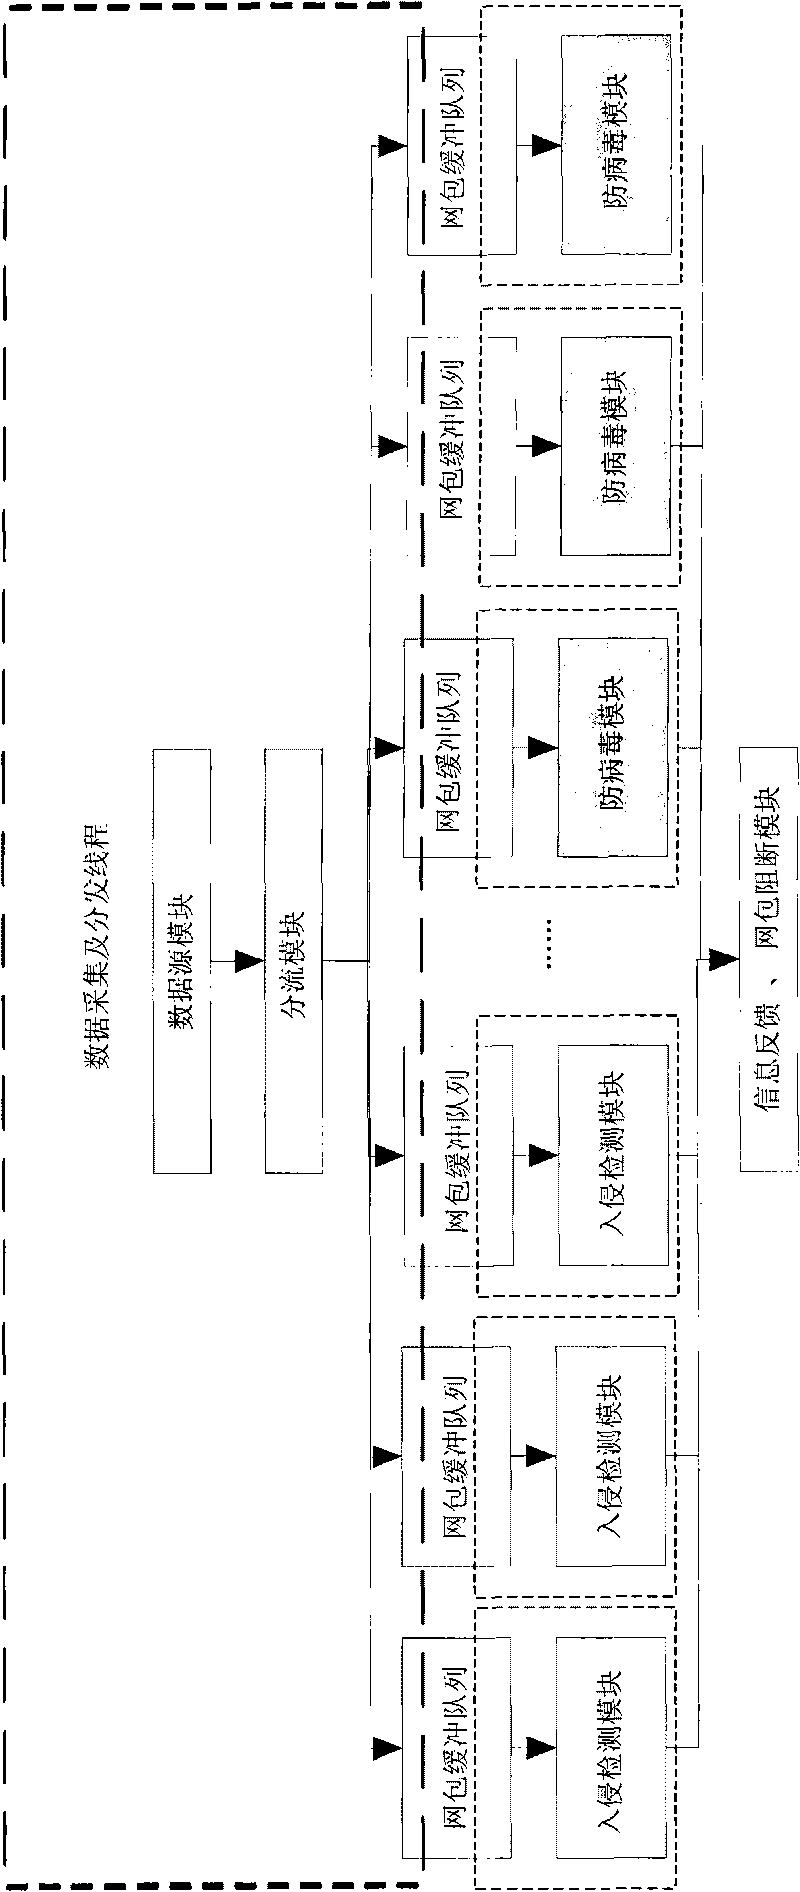 Modularized network intrusion detection system